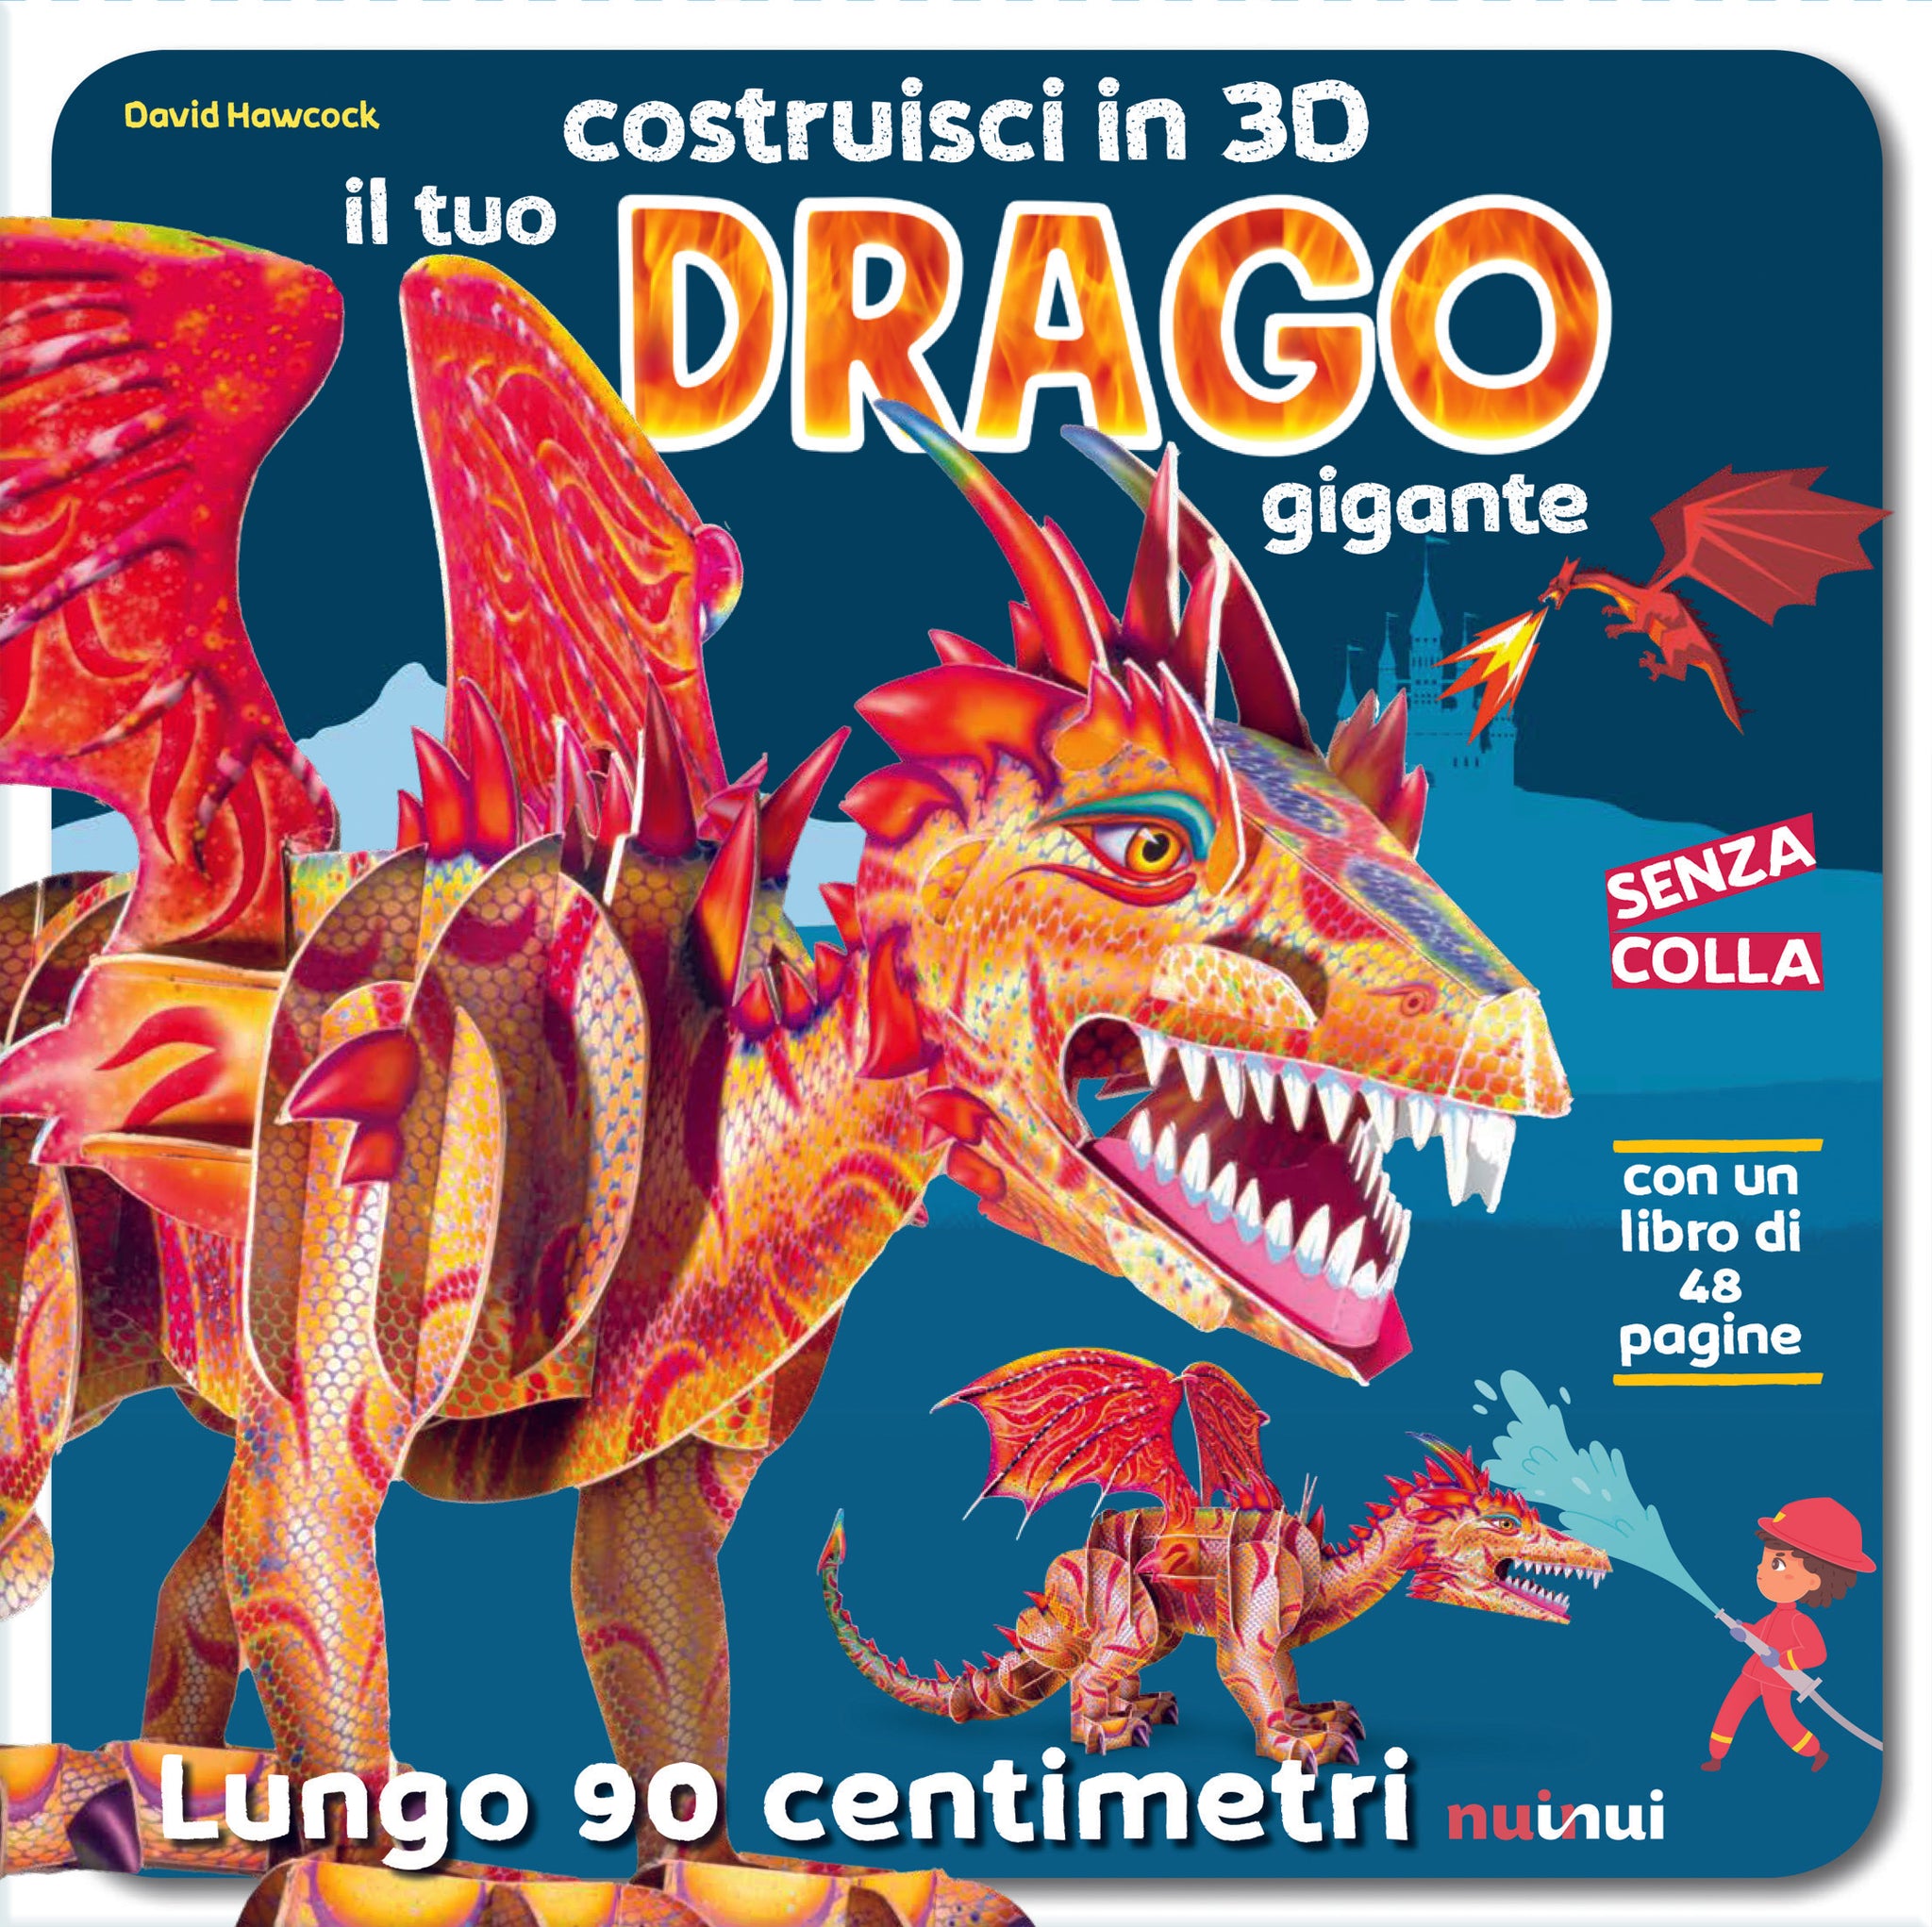 Build in 3D - Your own giant dragon